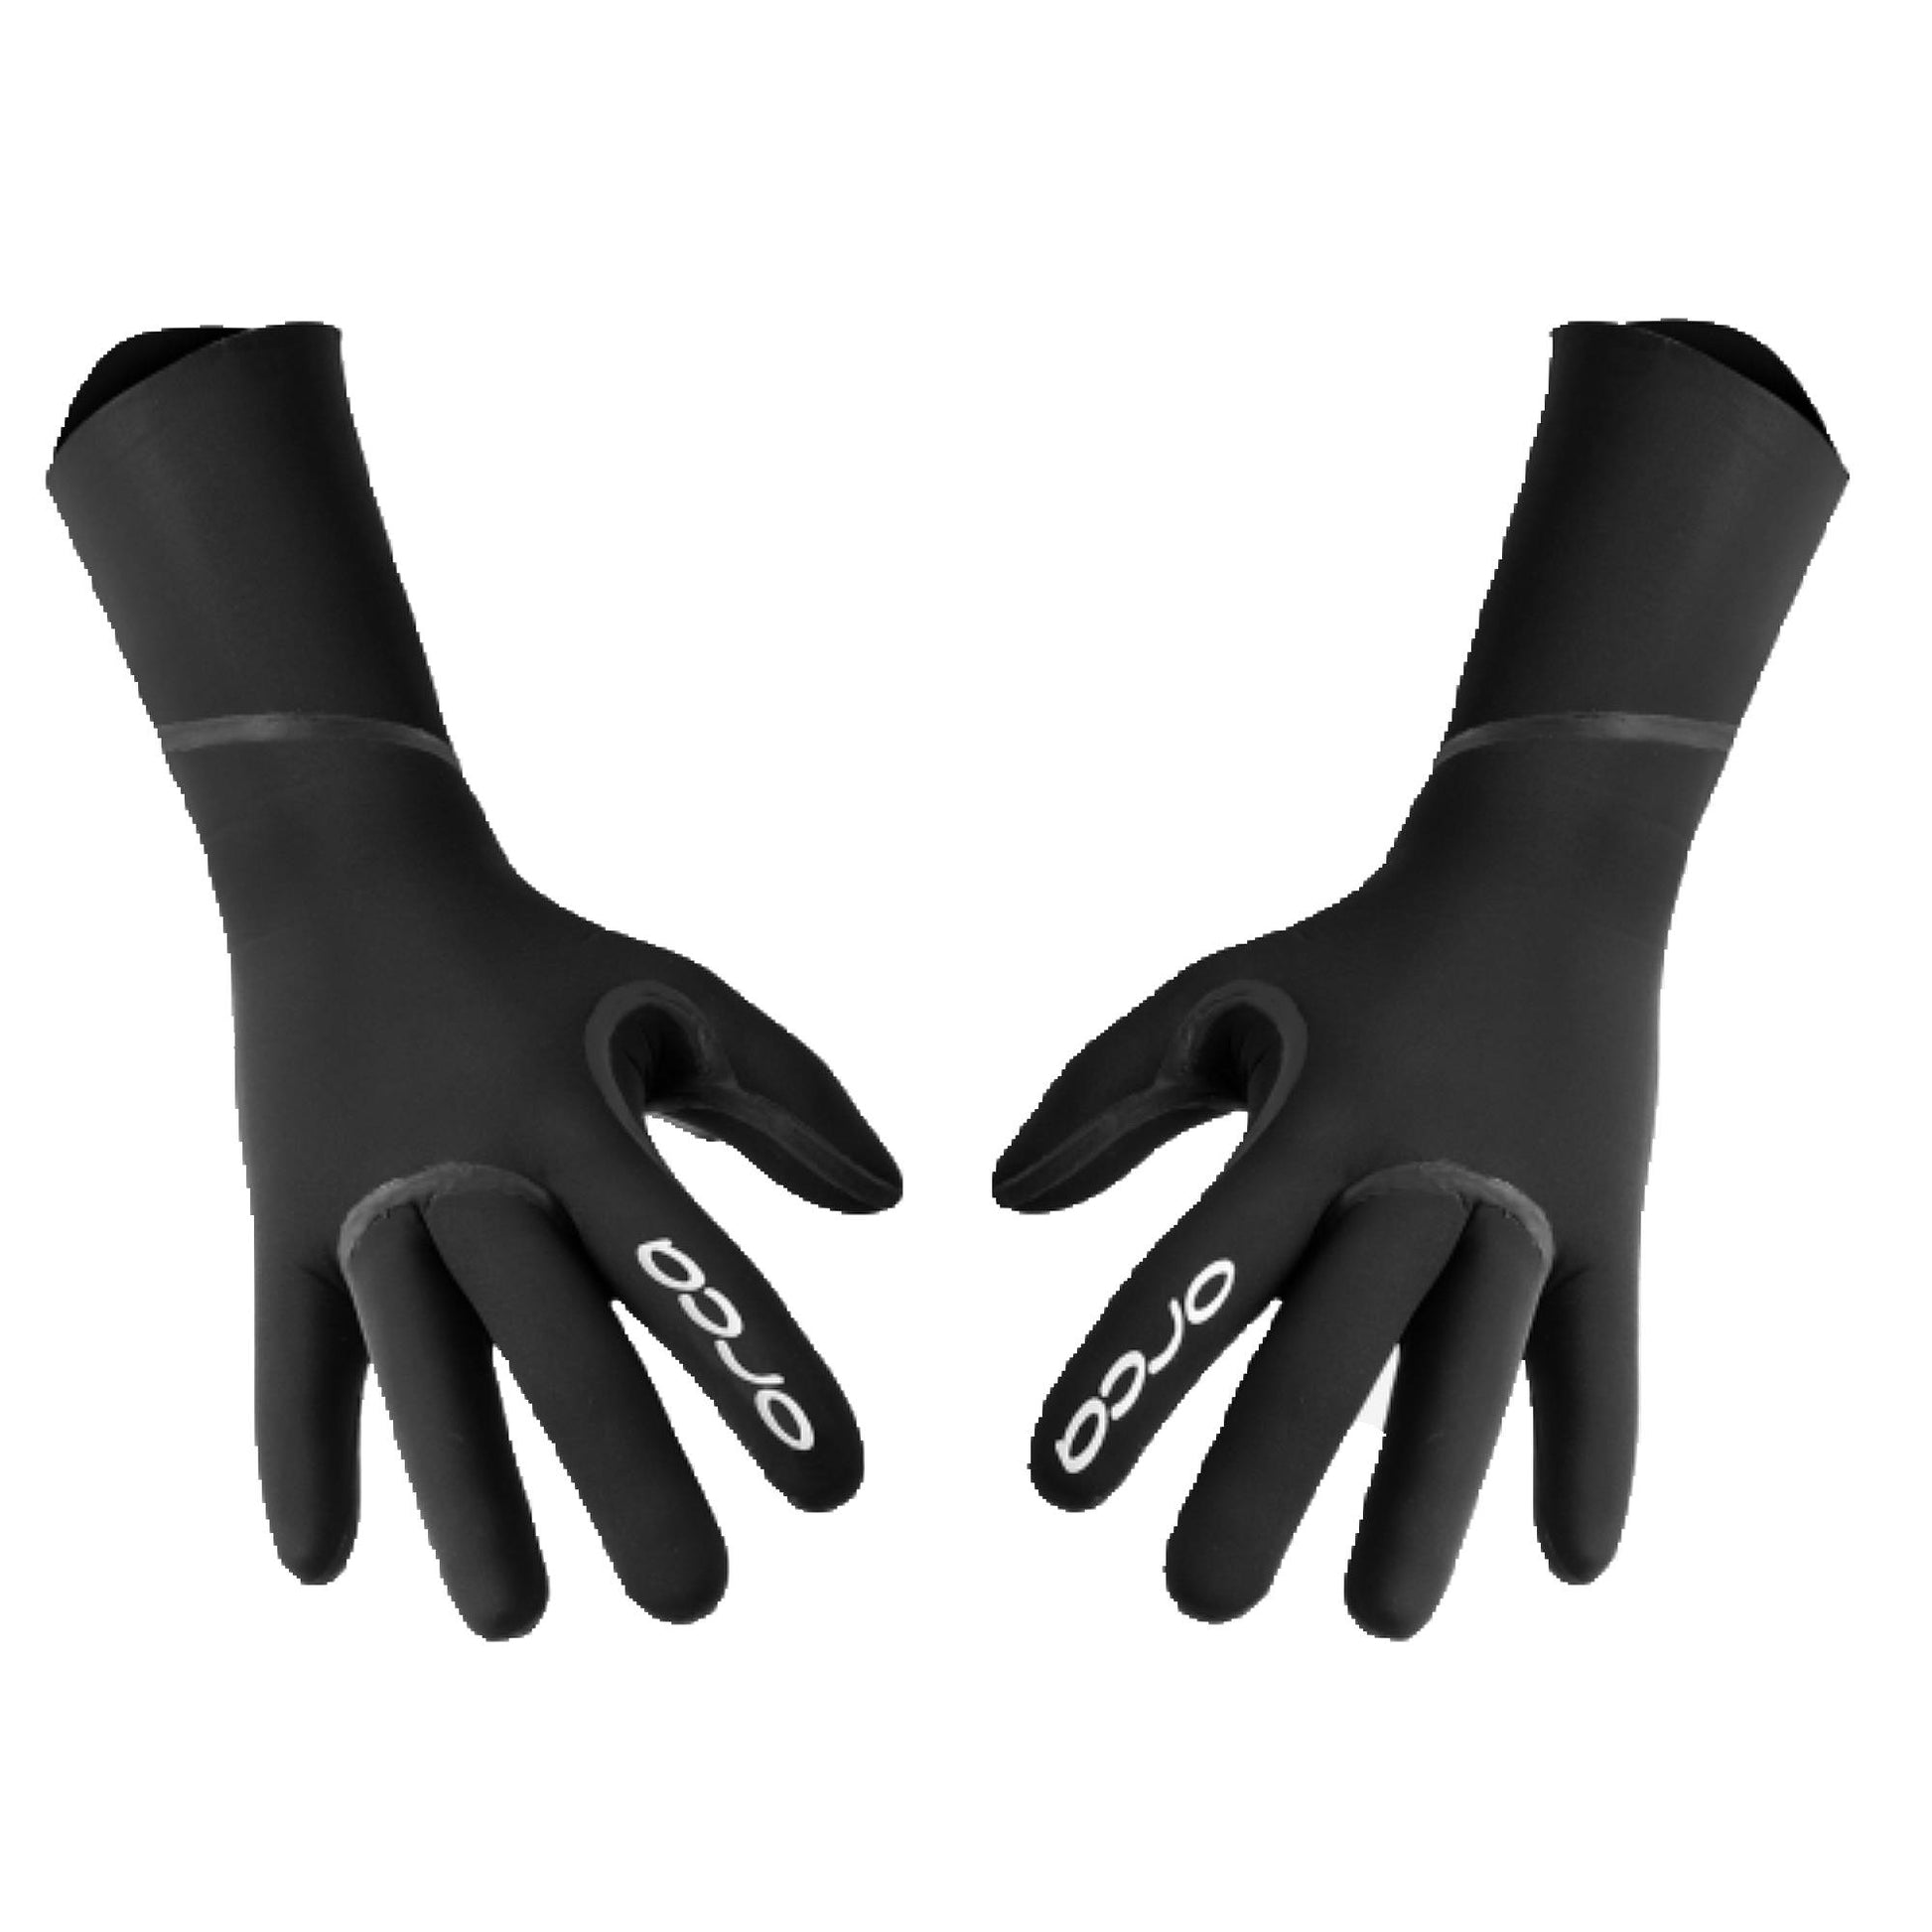 Orca Open Water Swimming Gloves for Men